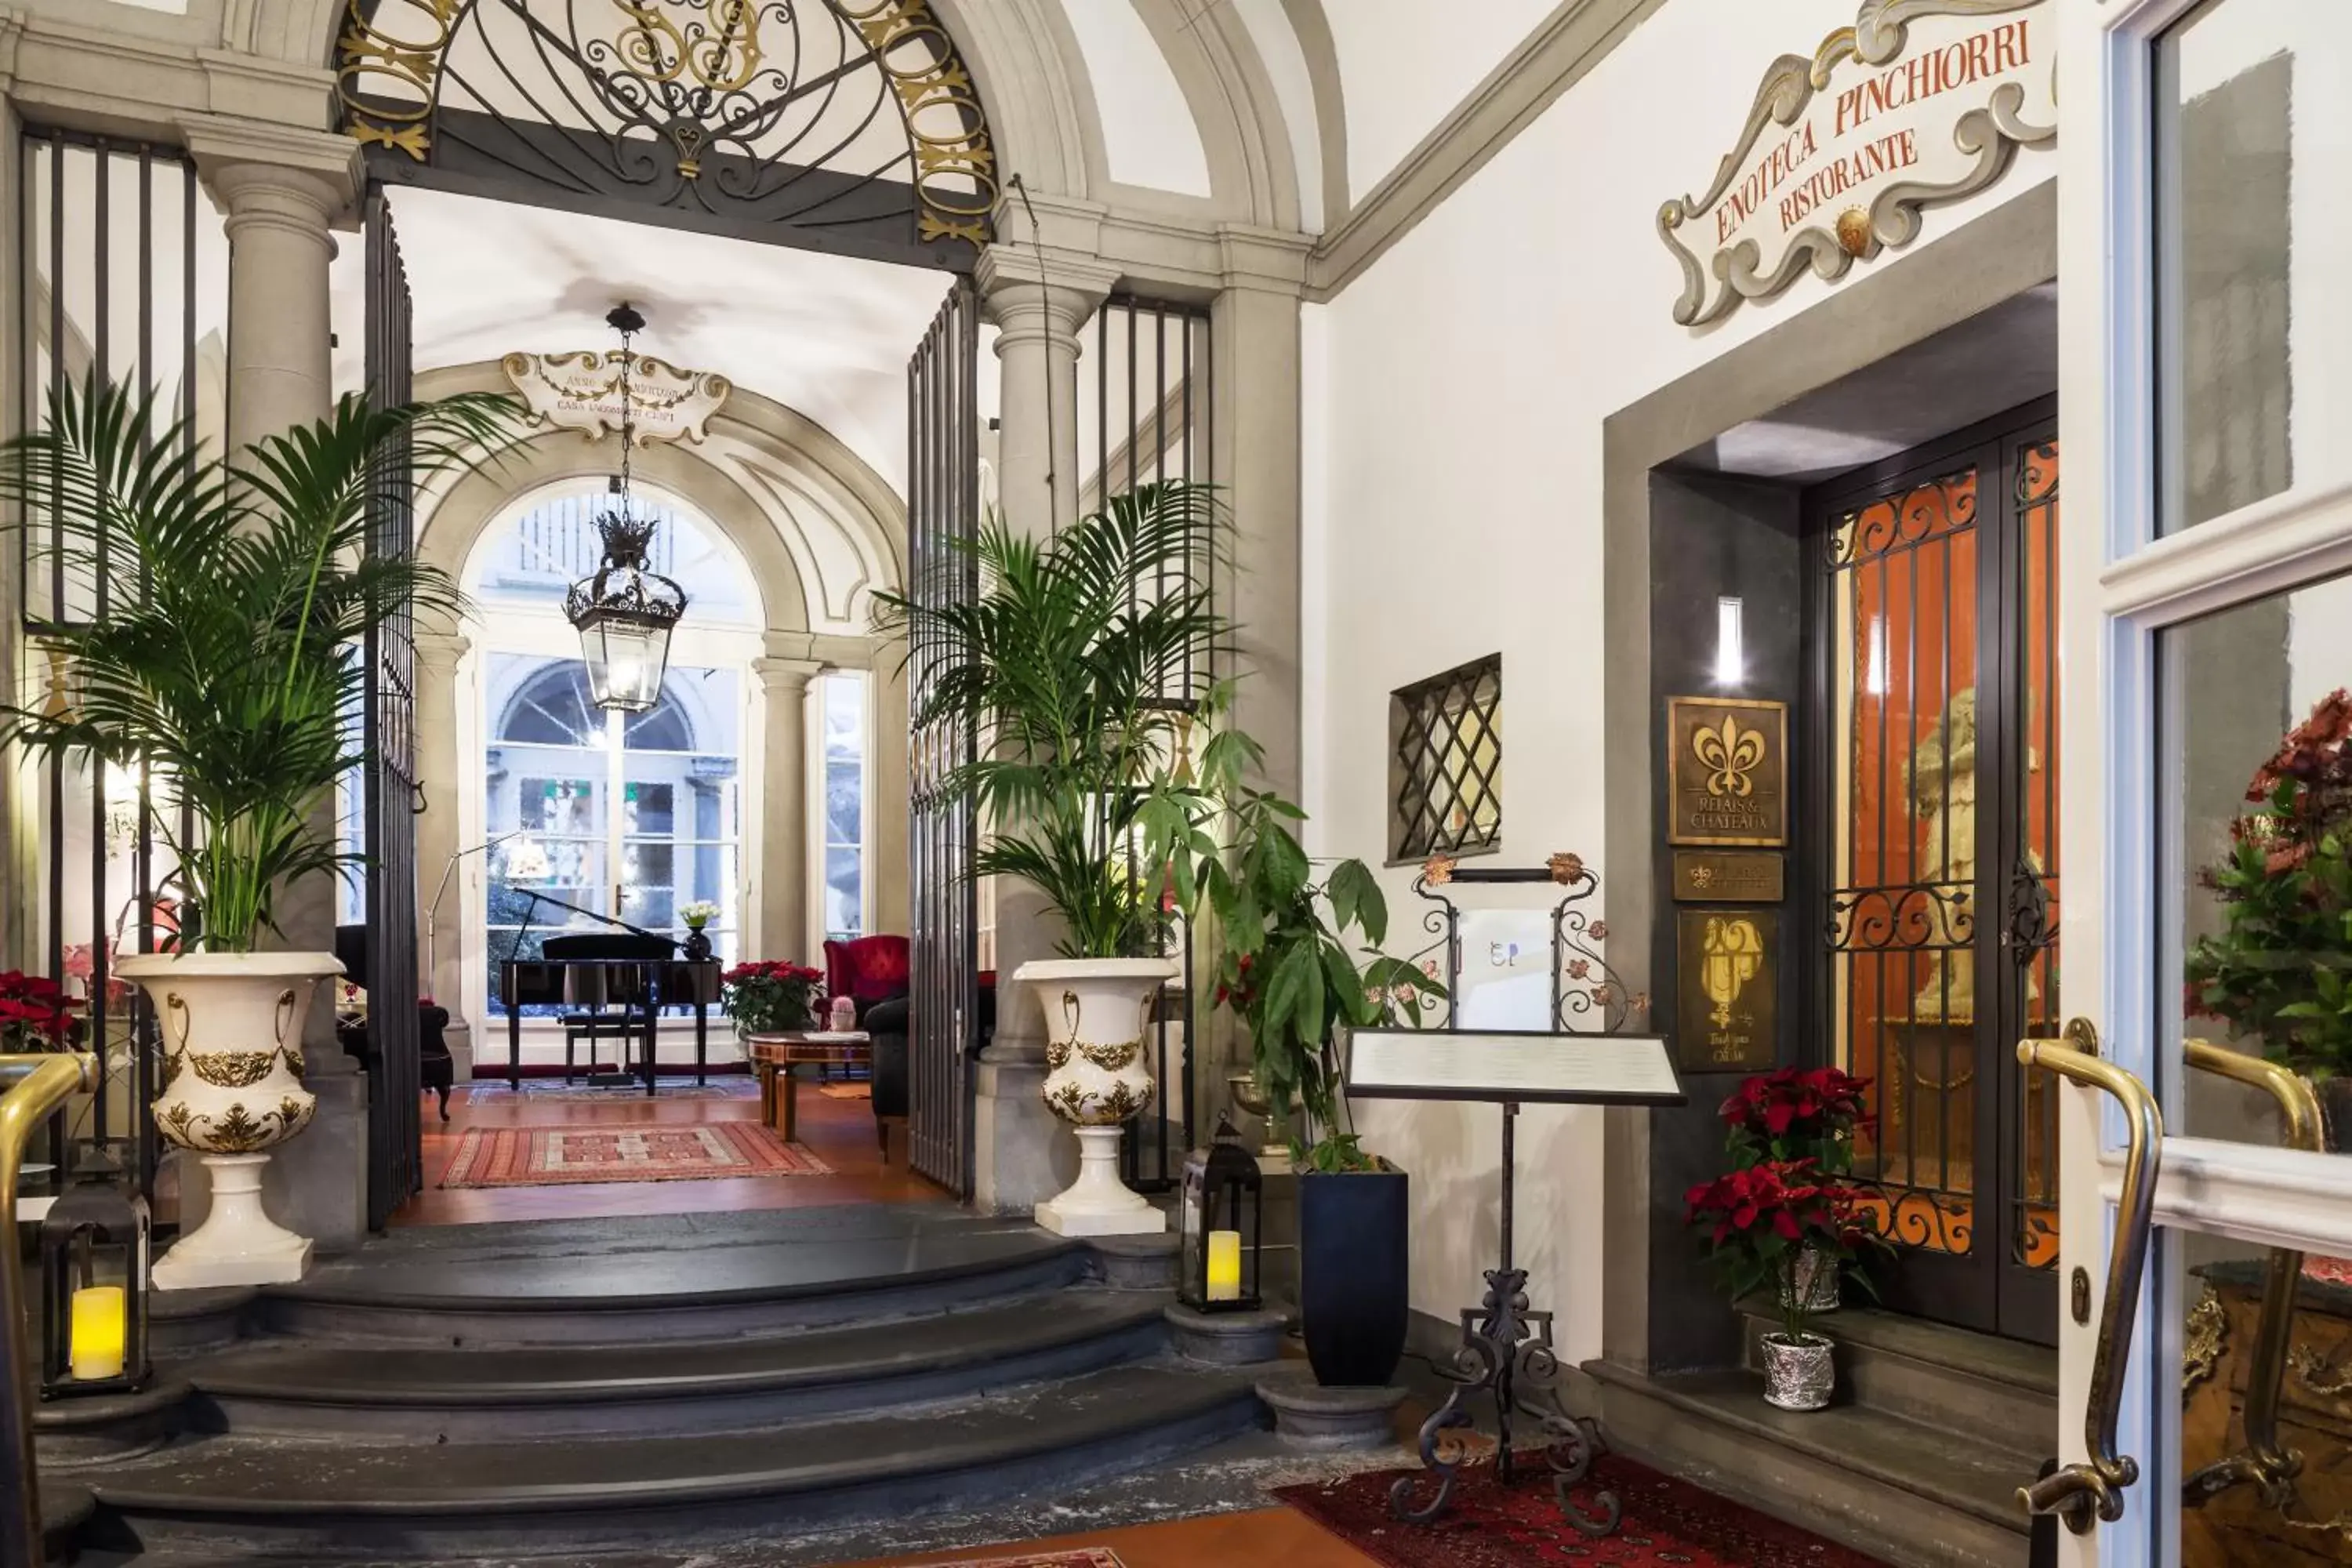 Property building in Relais Santa Croce, By Baglioni Hotels